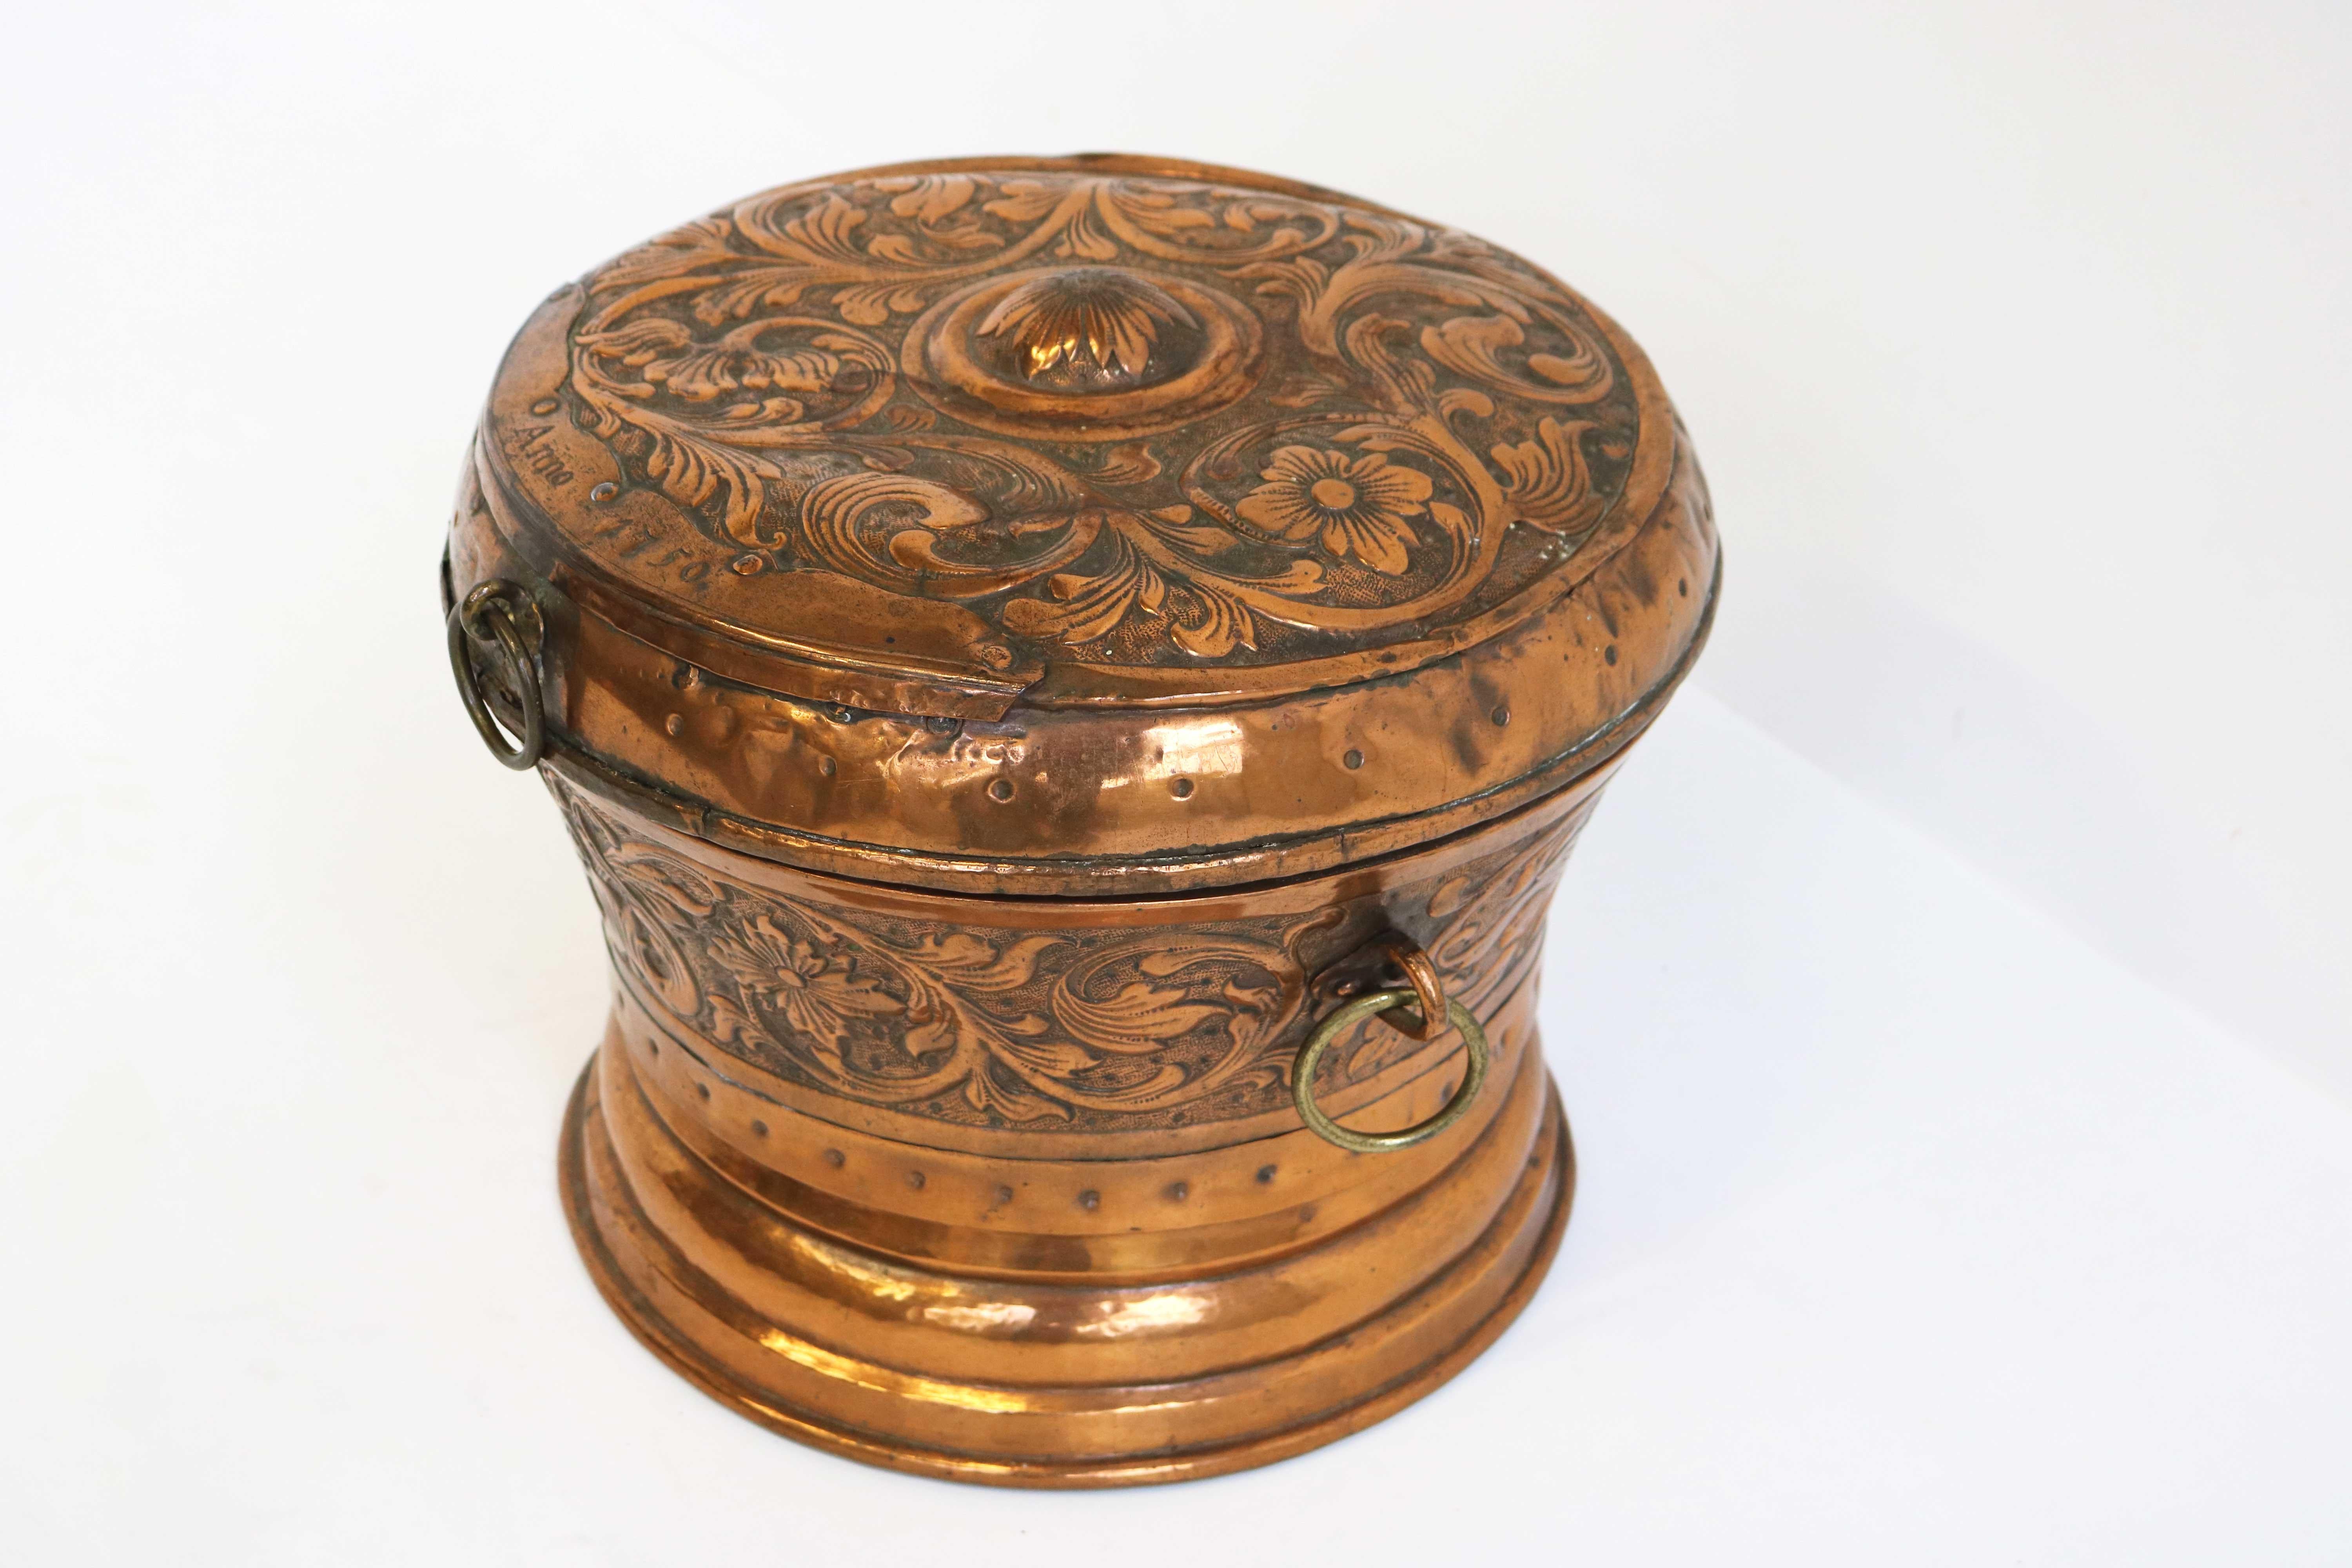 Decorated Dutch Antique Copper Bowl / Pot with Lid, 18th Century, Dated 1750 For Sale 2